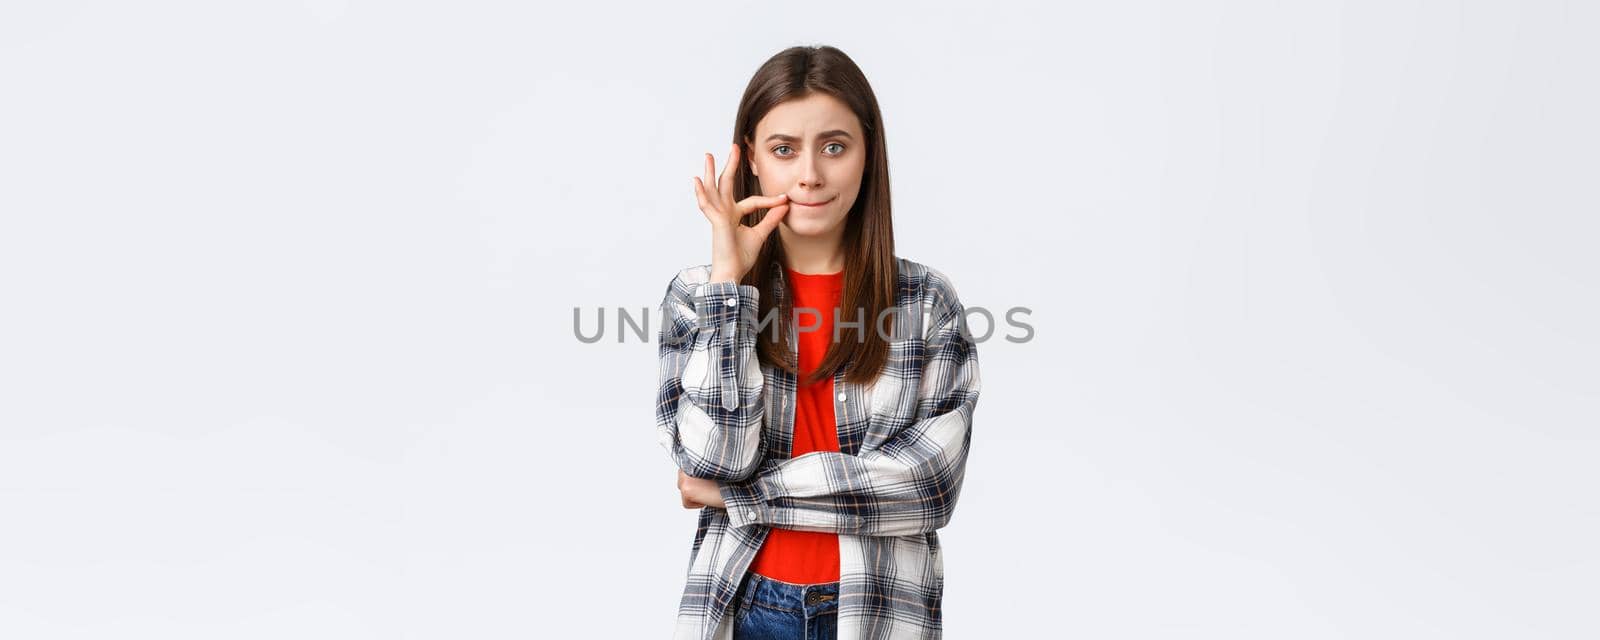 Lifestyle, different emotions, leisure activities concept. Serious-looking young woman promise keep mouth shut, making seal lips gesture, zipping it and look camera, someone sharing secret.